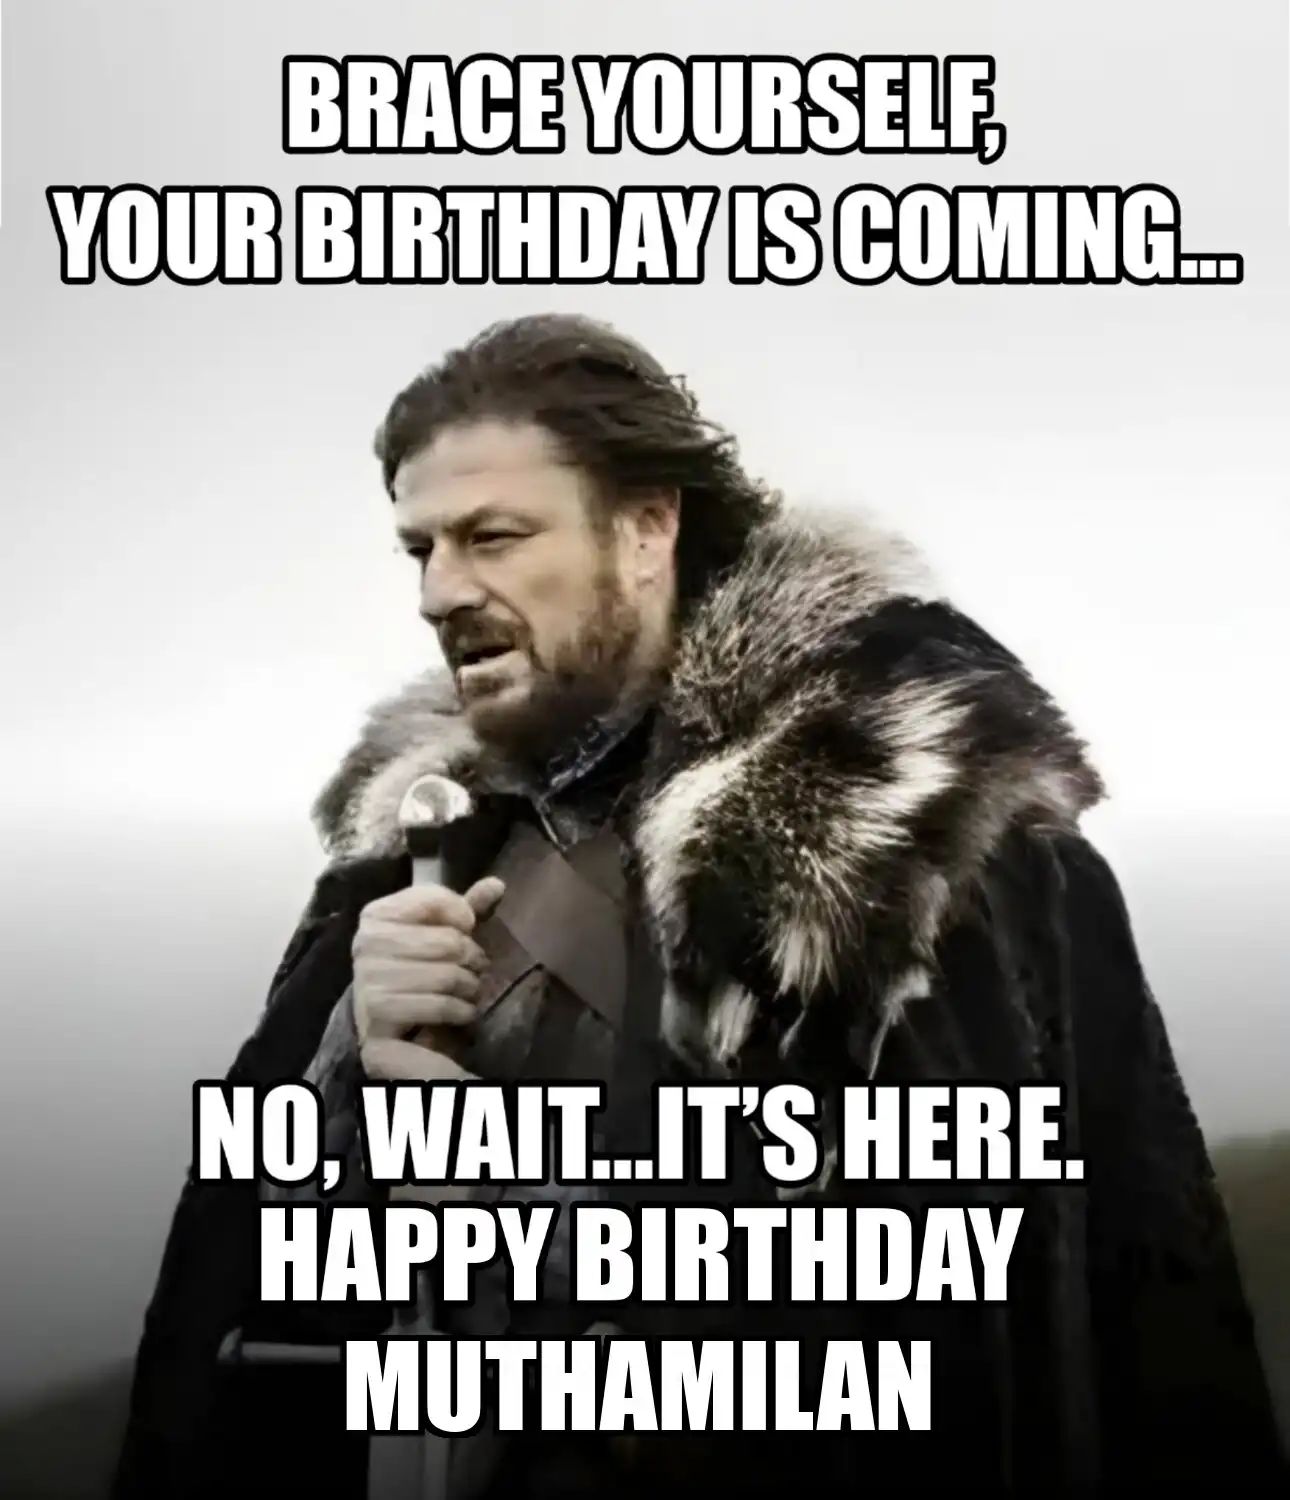 Happy Birthday Muthamilan Brace Yourself Your Birthday Is Coming Meme